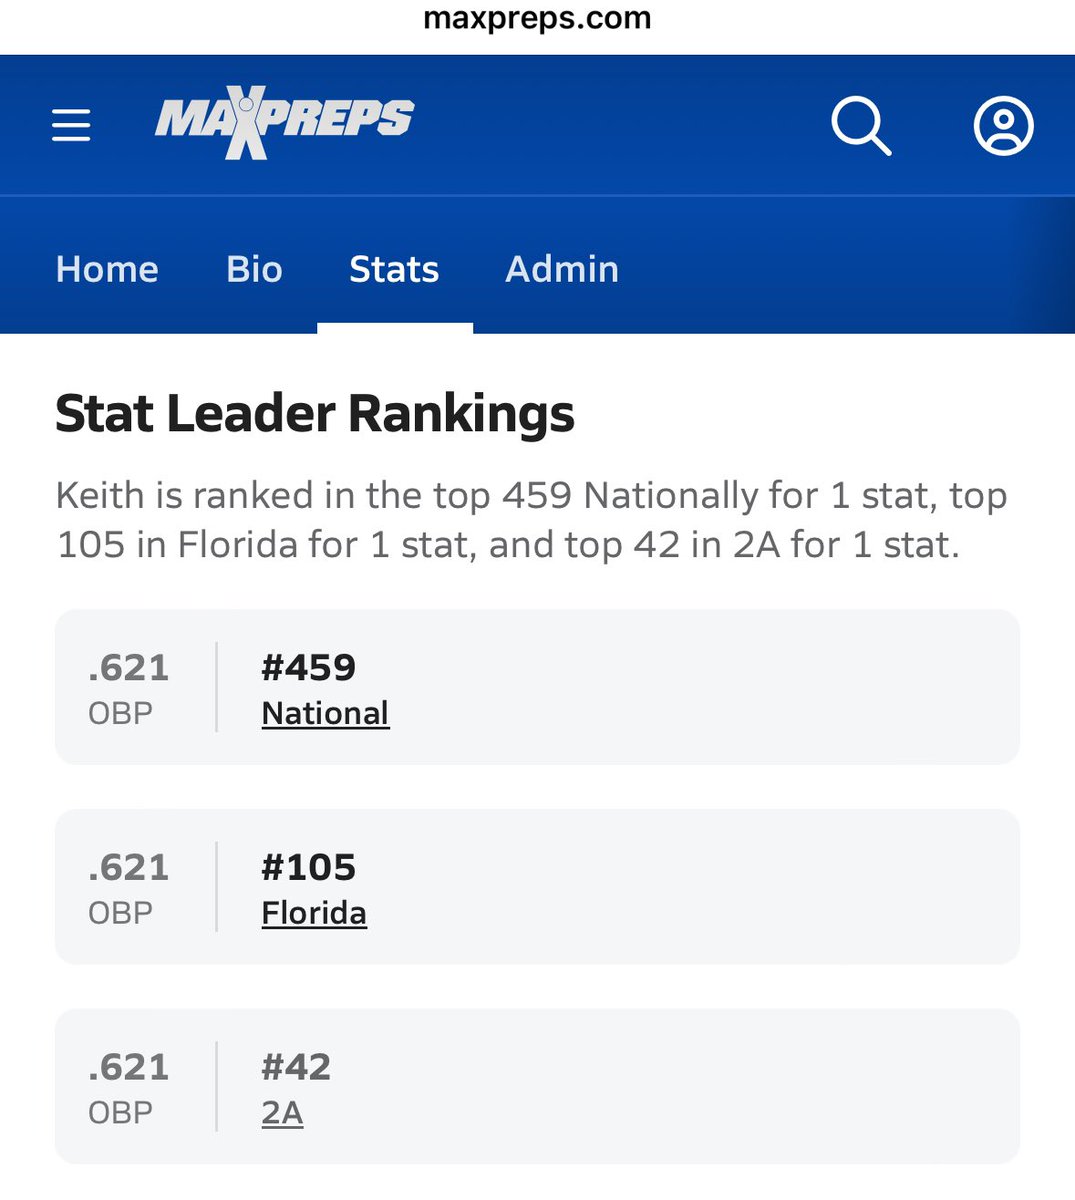 Keith (Deuce) Jacobs @DeuceJacobs2, 2025, halfway thru the season is ranked 459th Nationally, 105th in Florida and 42nd in class in OBP while also hitting .444 avg @BMCHS_ATHLETICS @813Preps @Biggamebobby @PrepBaseballFL @PBR_Uncommitted @TheClubhouseBa3 @brayers_ @paul27russo